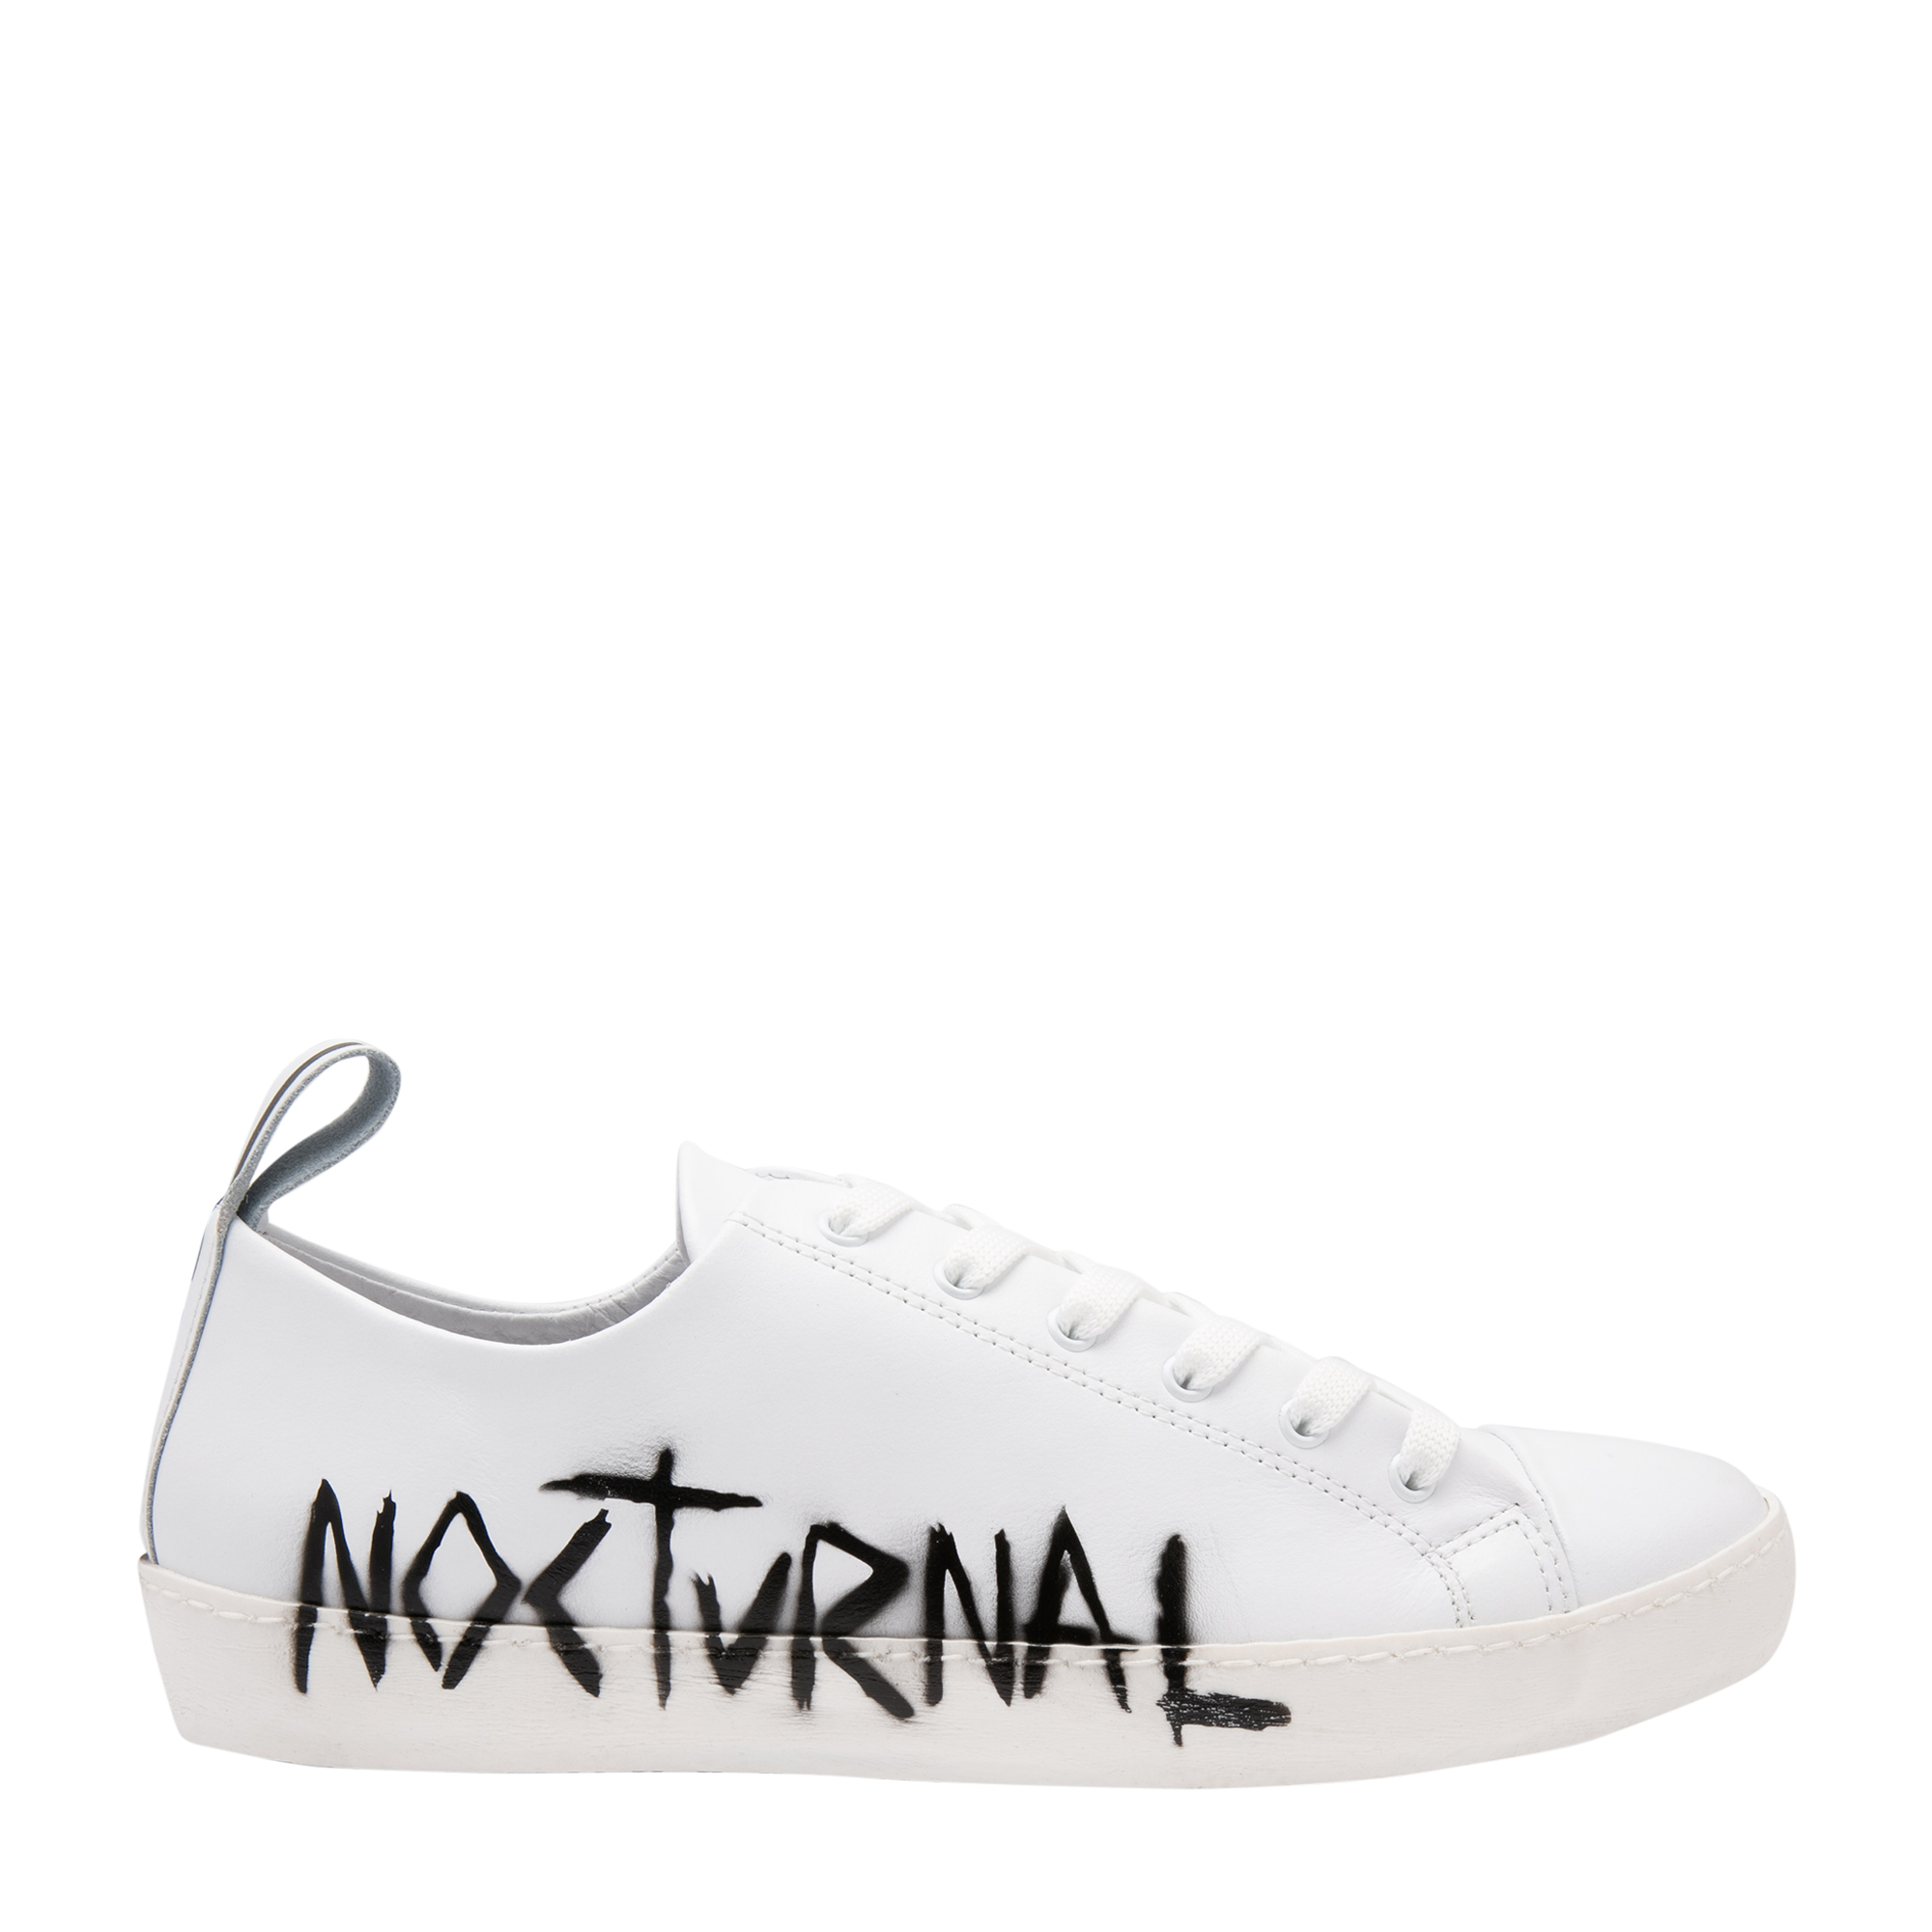 Nocturnal sneakers